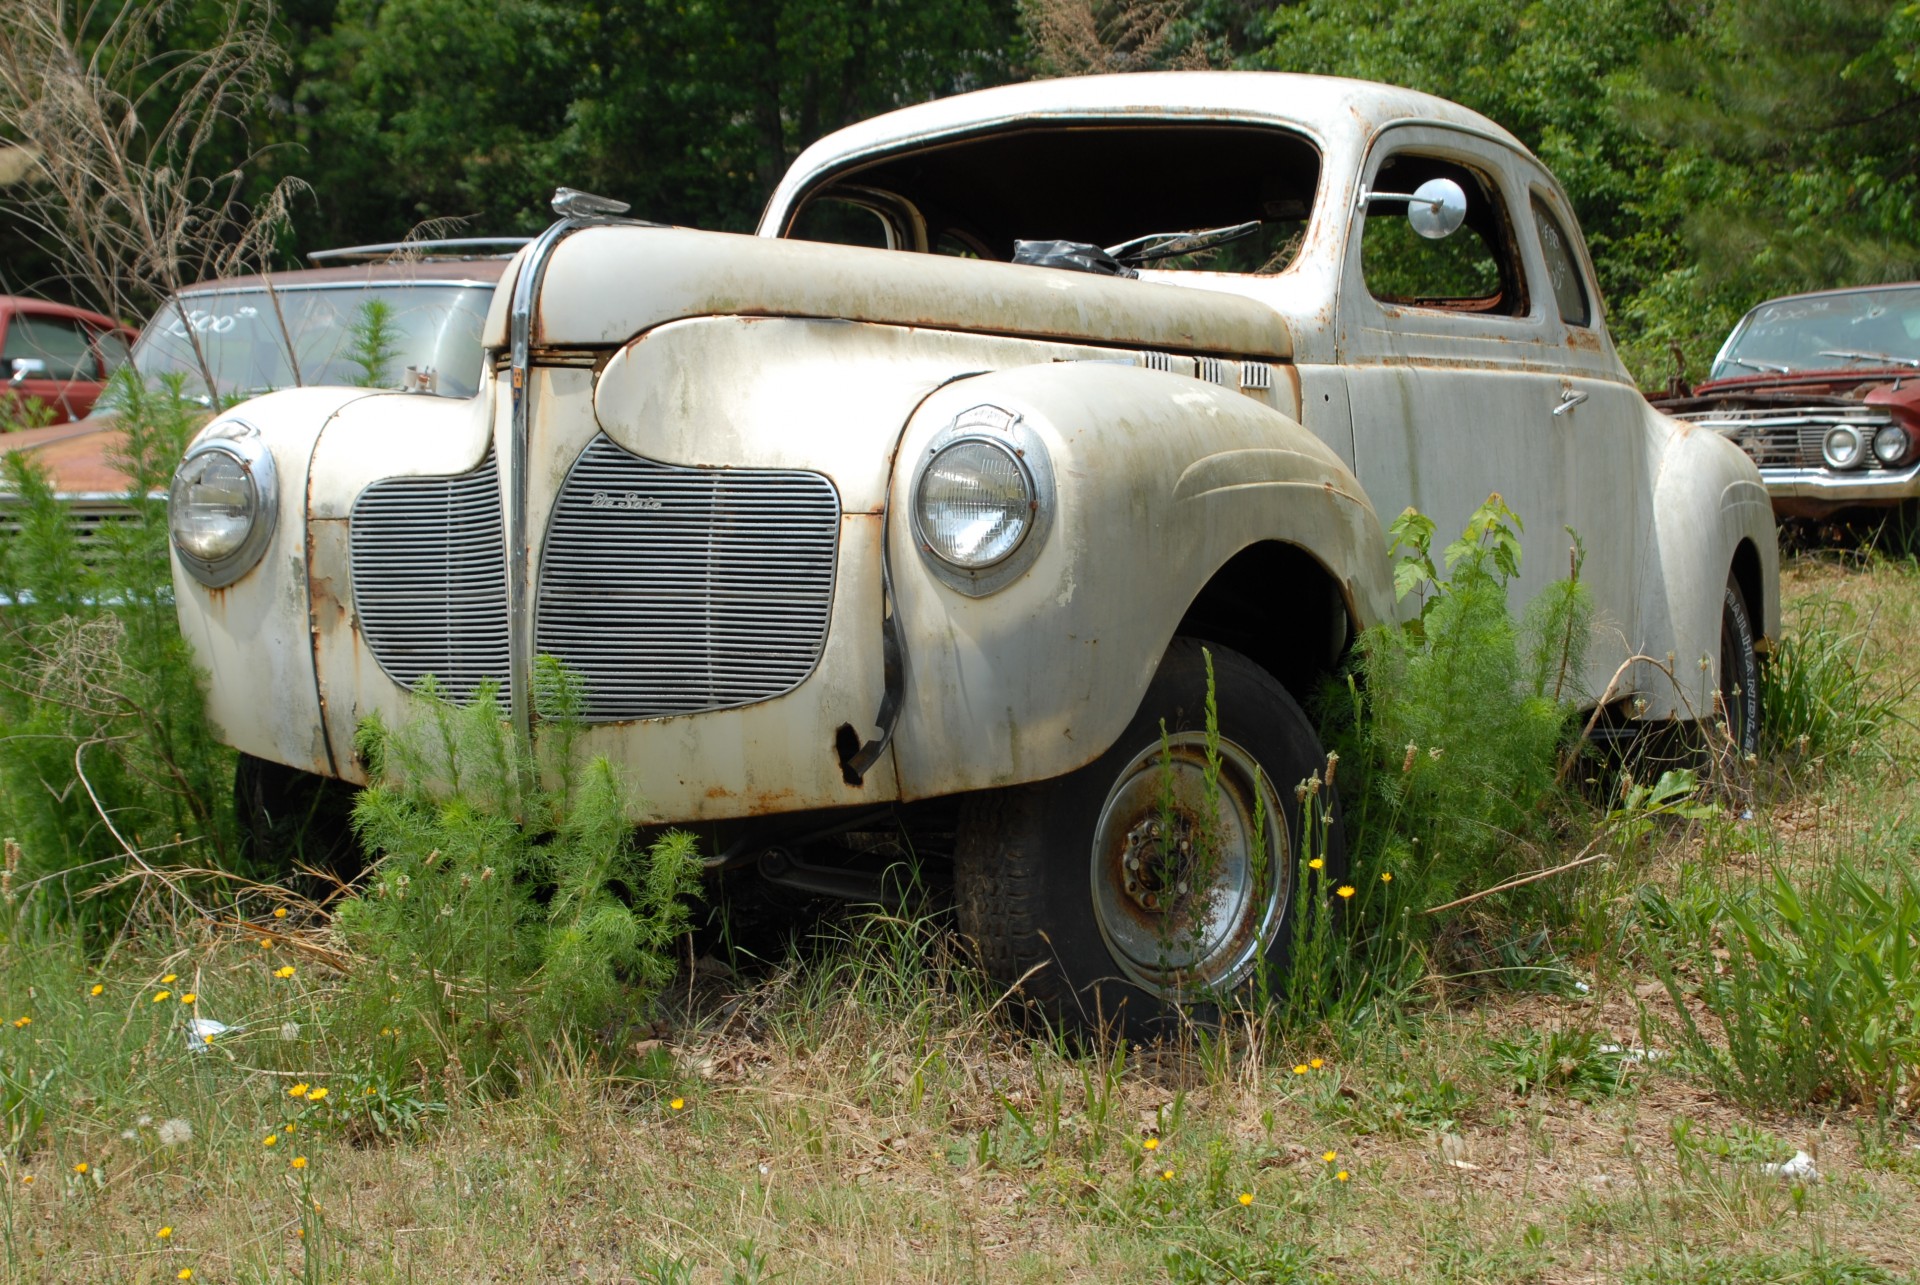 Junked cars for sale at rural Georgia, USA